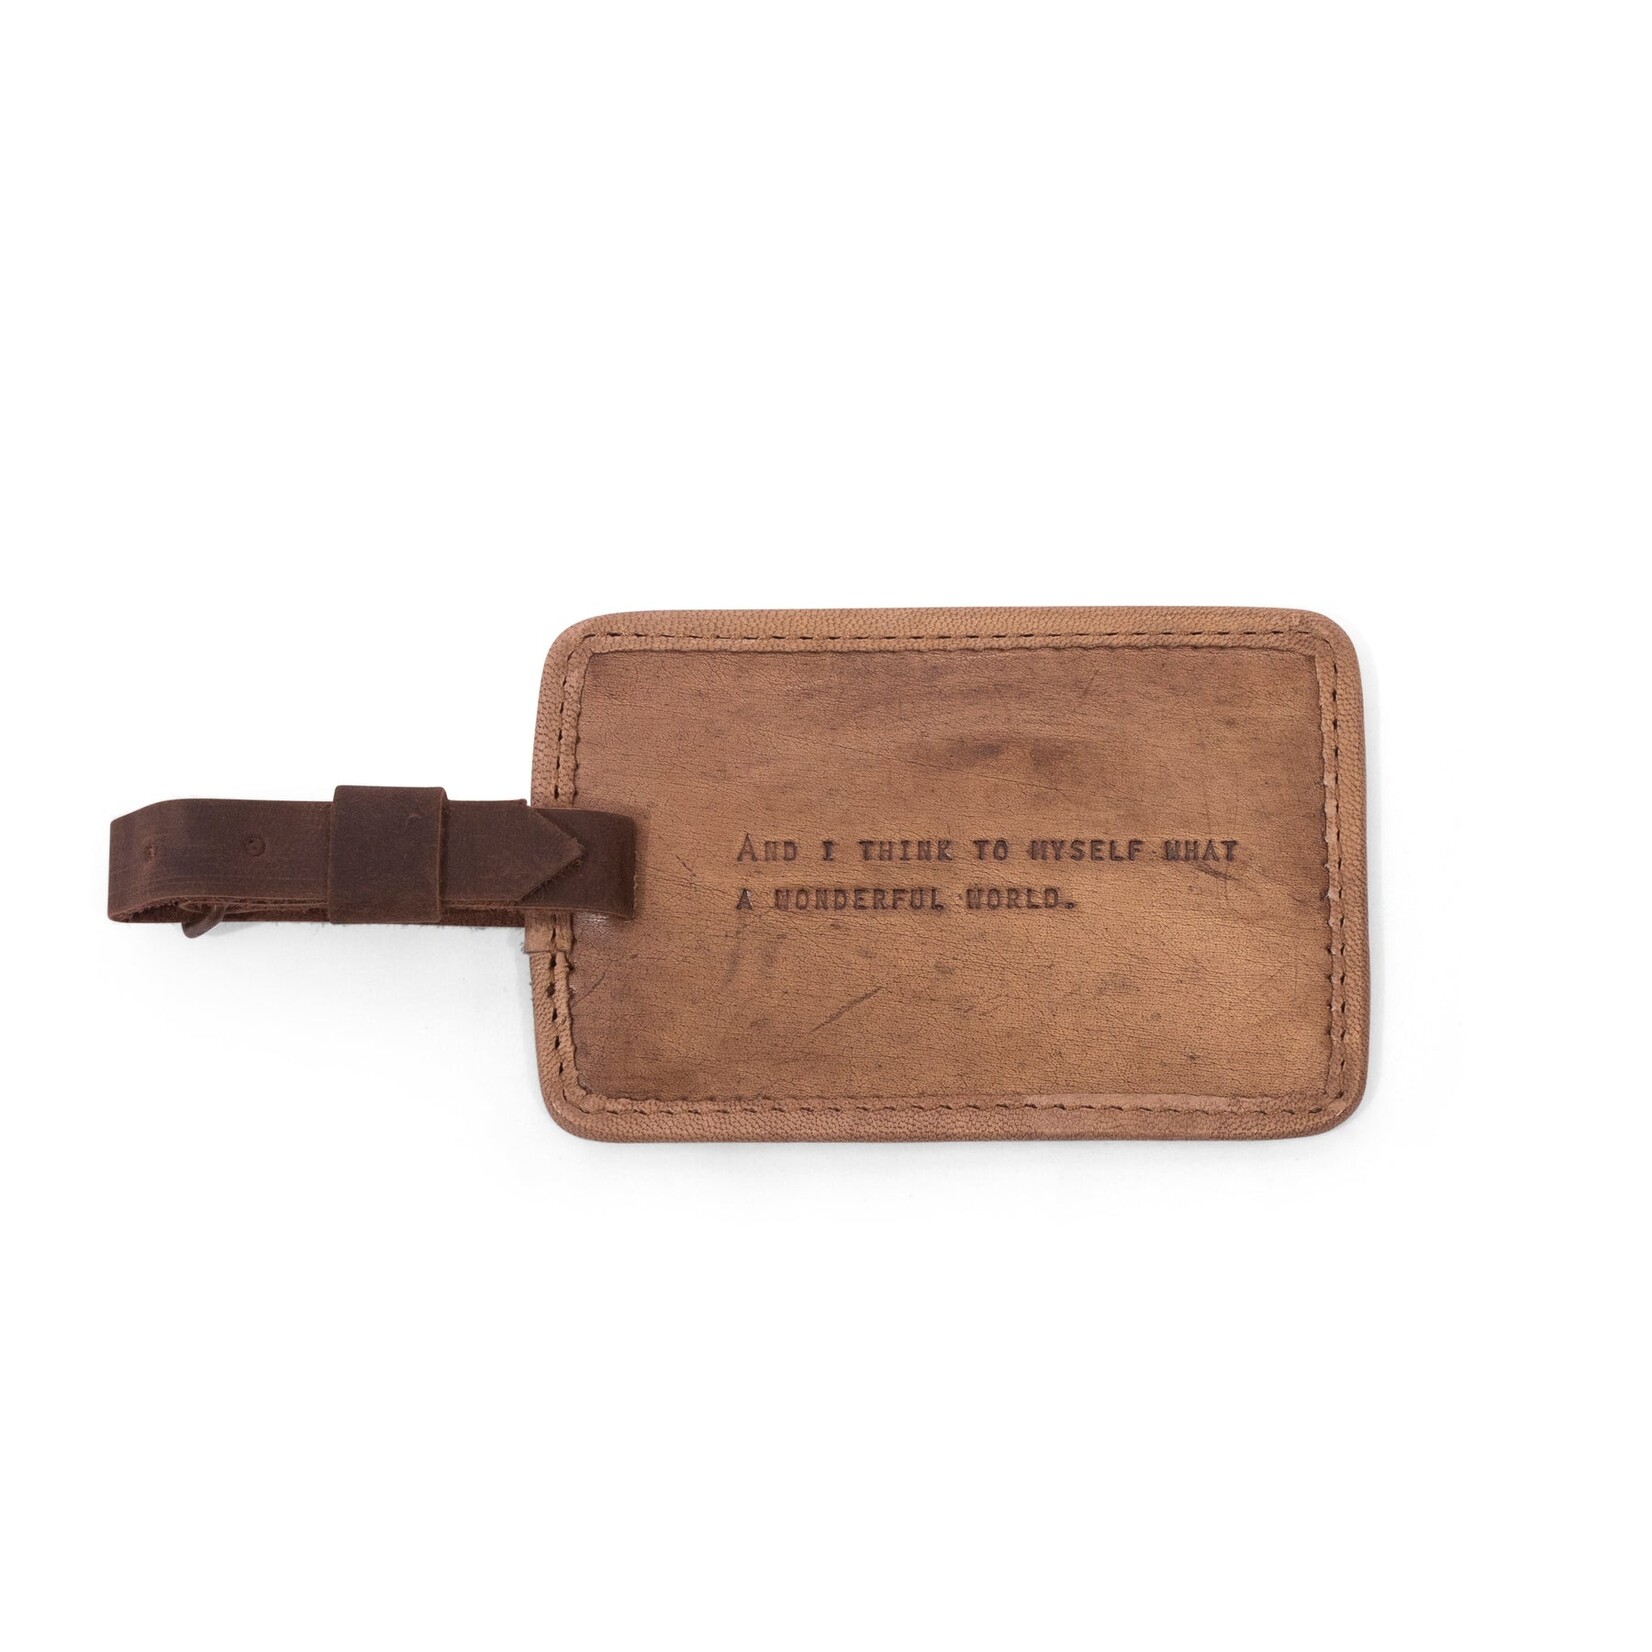 Sugarboo & Co. Sugarboo Leather Luggage Tag-